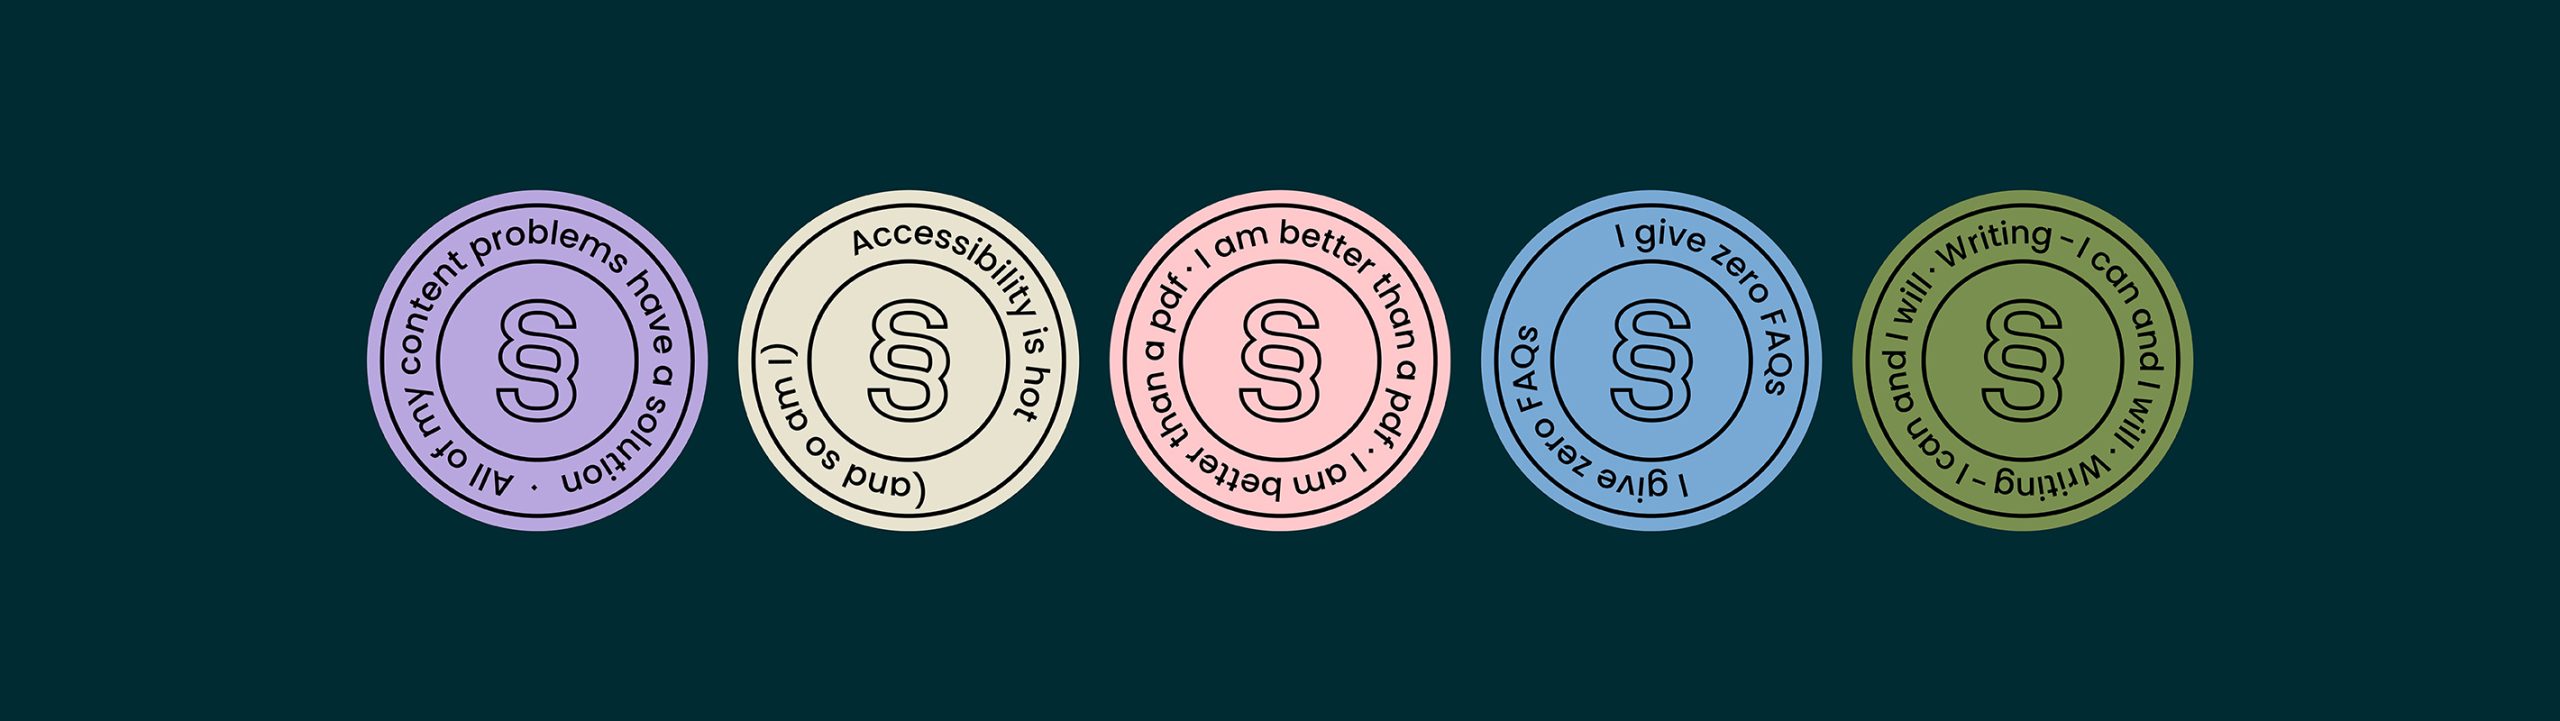 Rebranding case study image of Sarah Stanford’s content affirmation support graphics. In a retro-inspired colour palette, the imagery resembles stickers and contrasts to a deep green background.